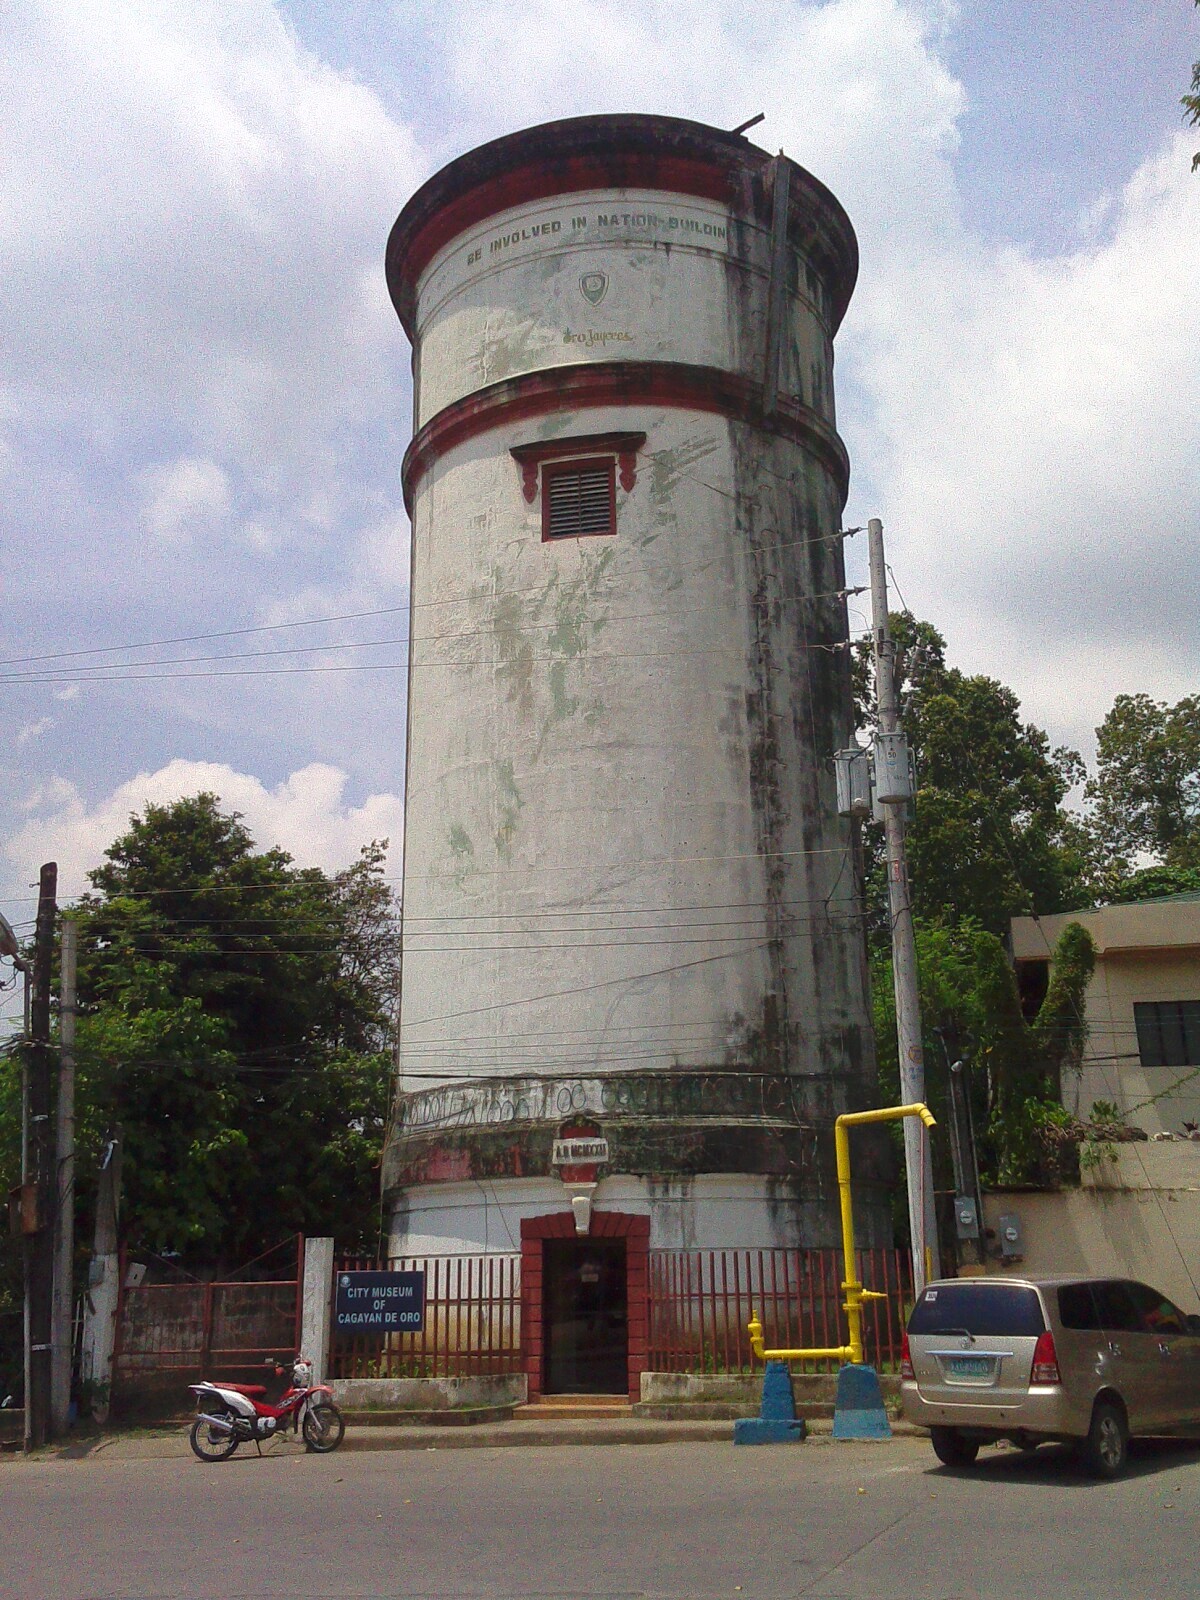 Sights & Sounds of Cagayan de Oro - City Museum and Water Tower Image: M FPoblete